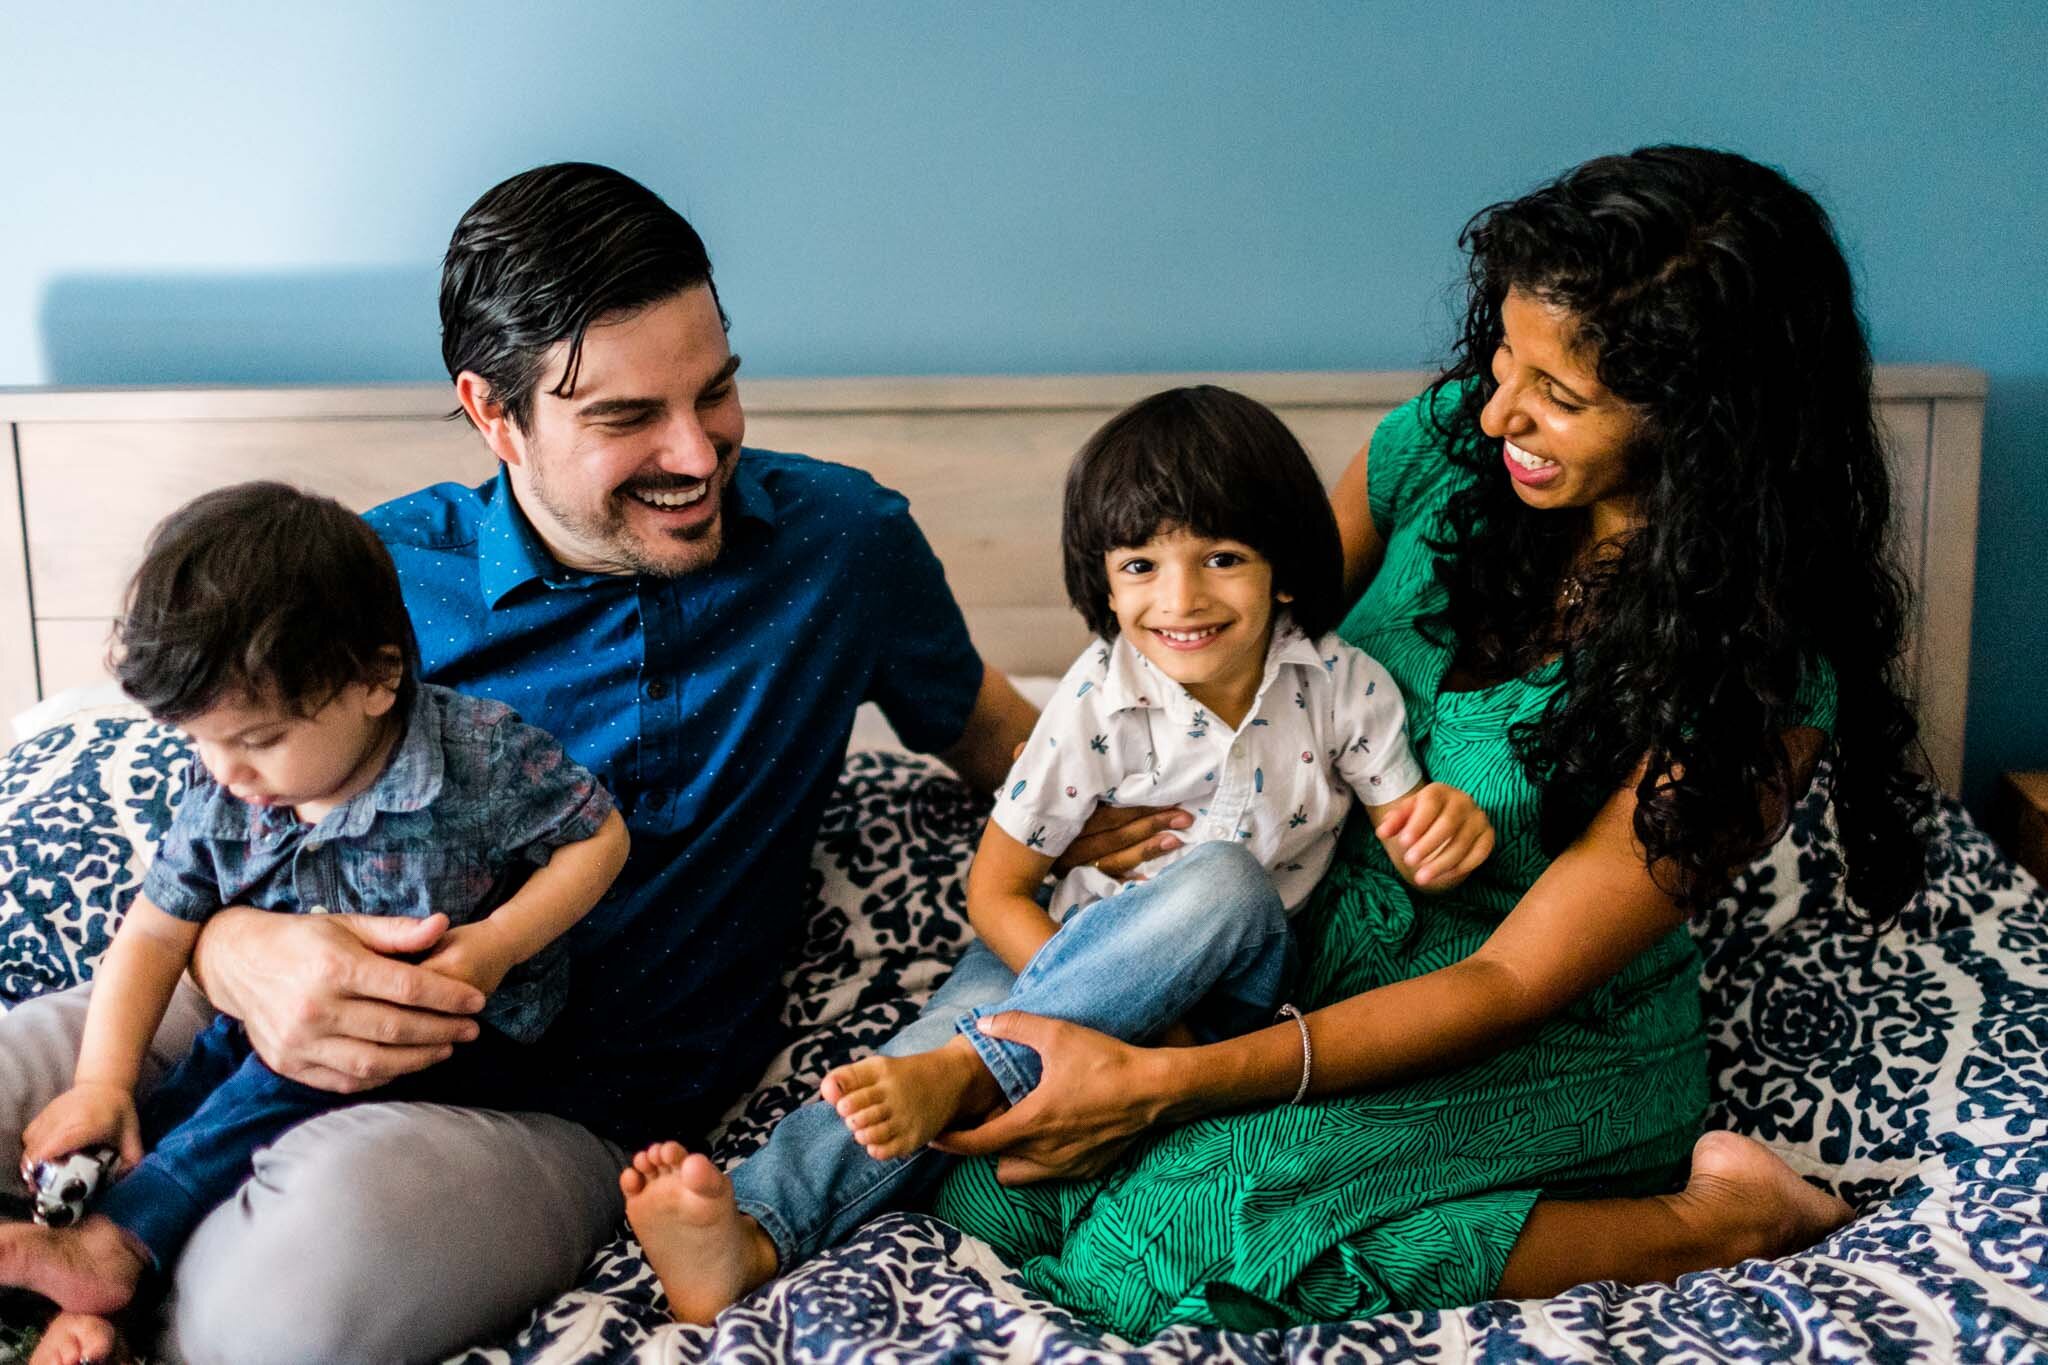 Durham Family Photographer | By G. Lin Photography | Family sitting together on bed | Lifestyle session at home